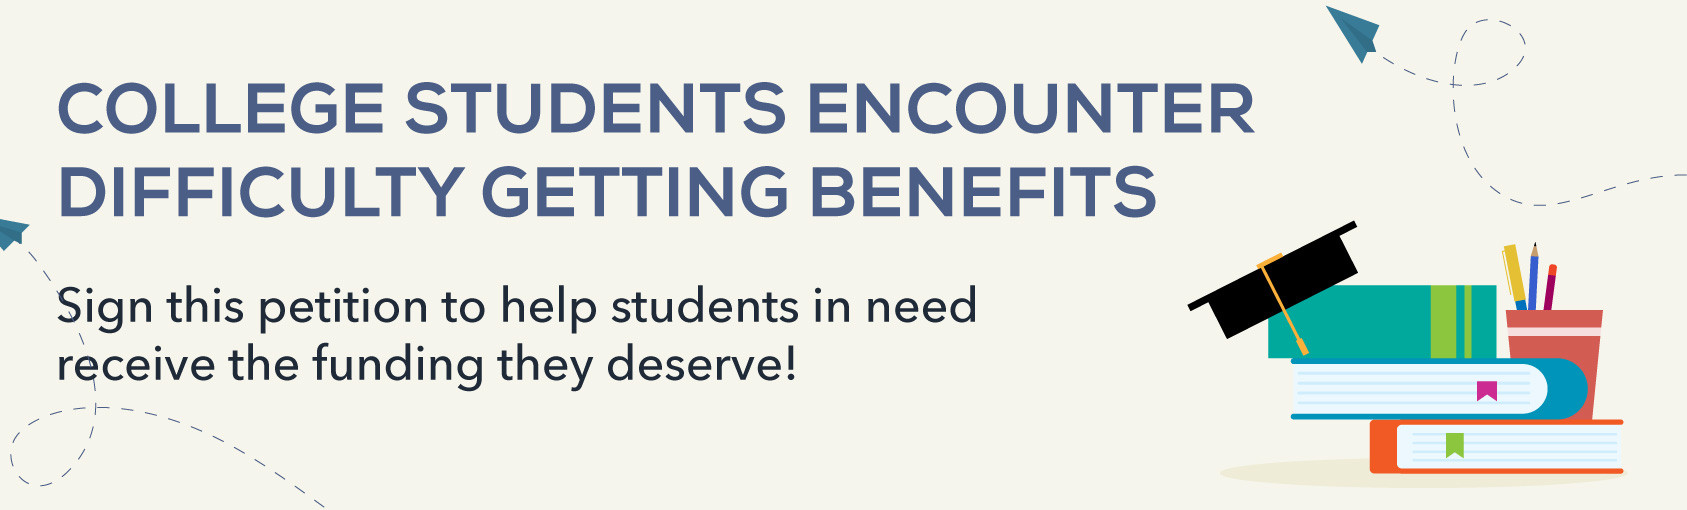 College Students Encounter Difficulty Getting Benefits banner